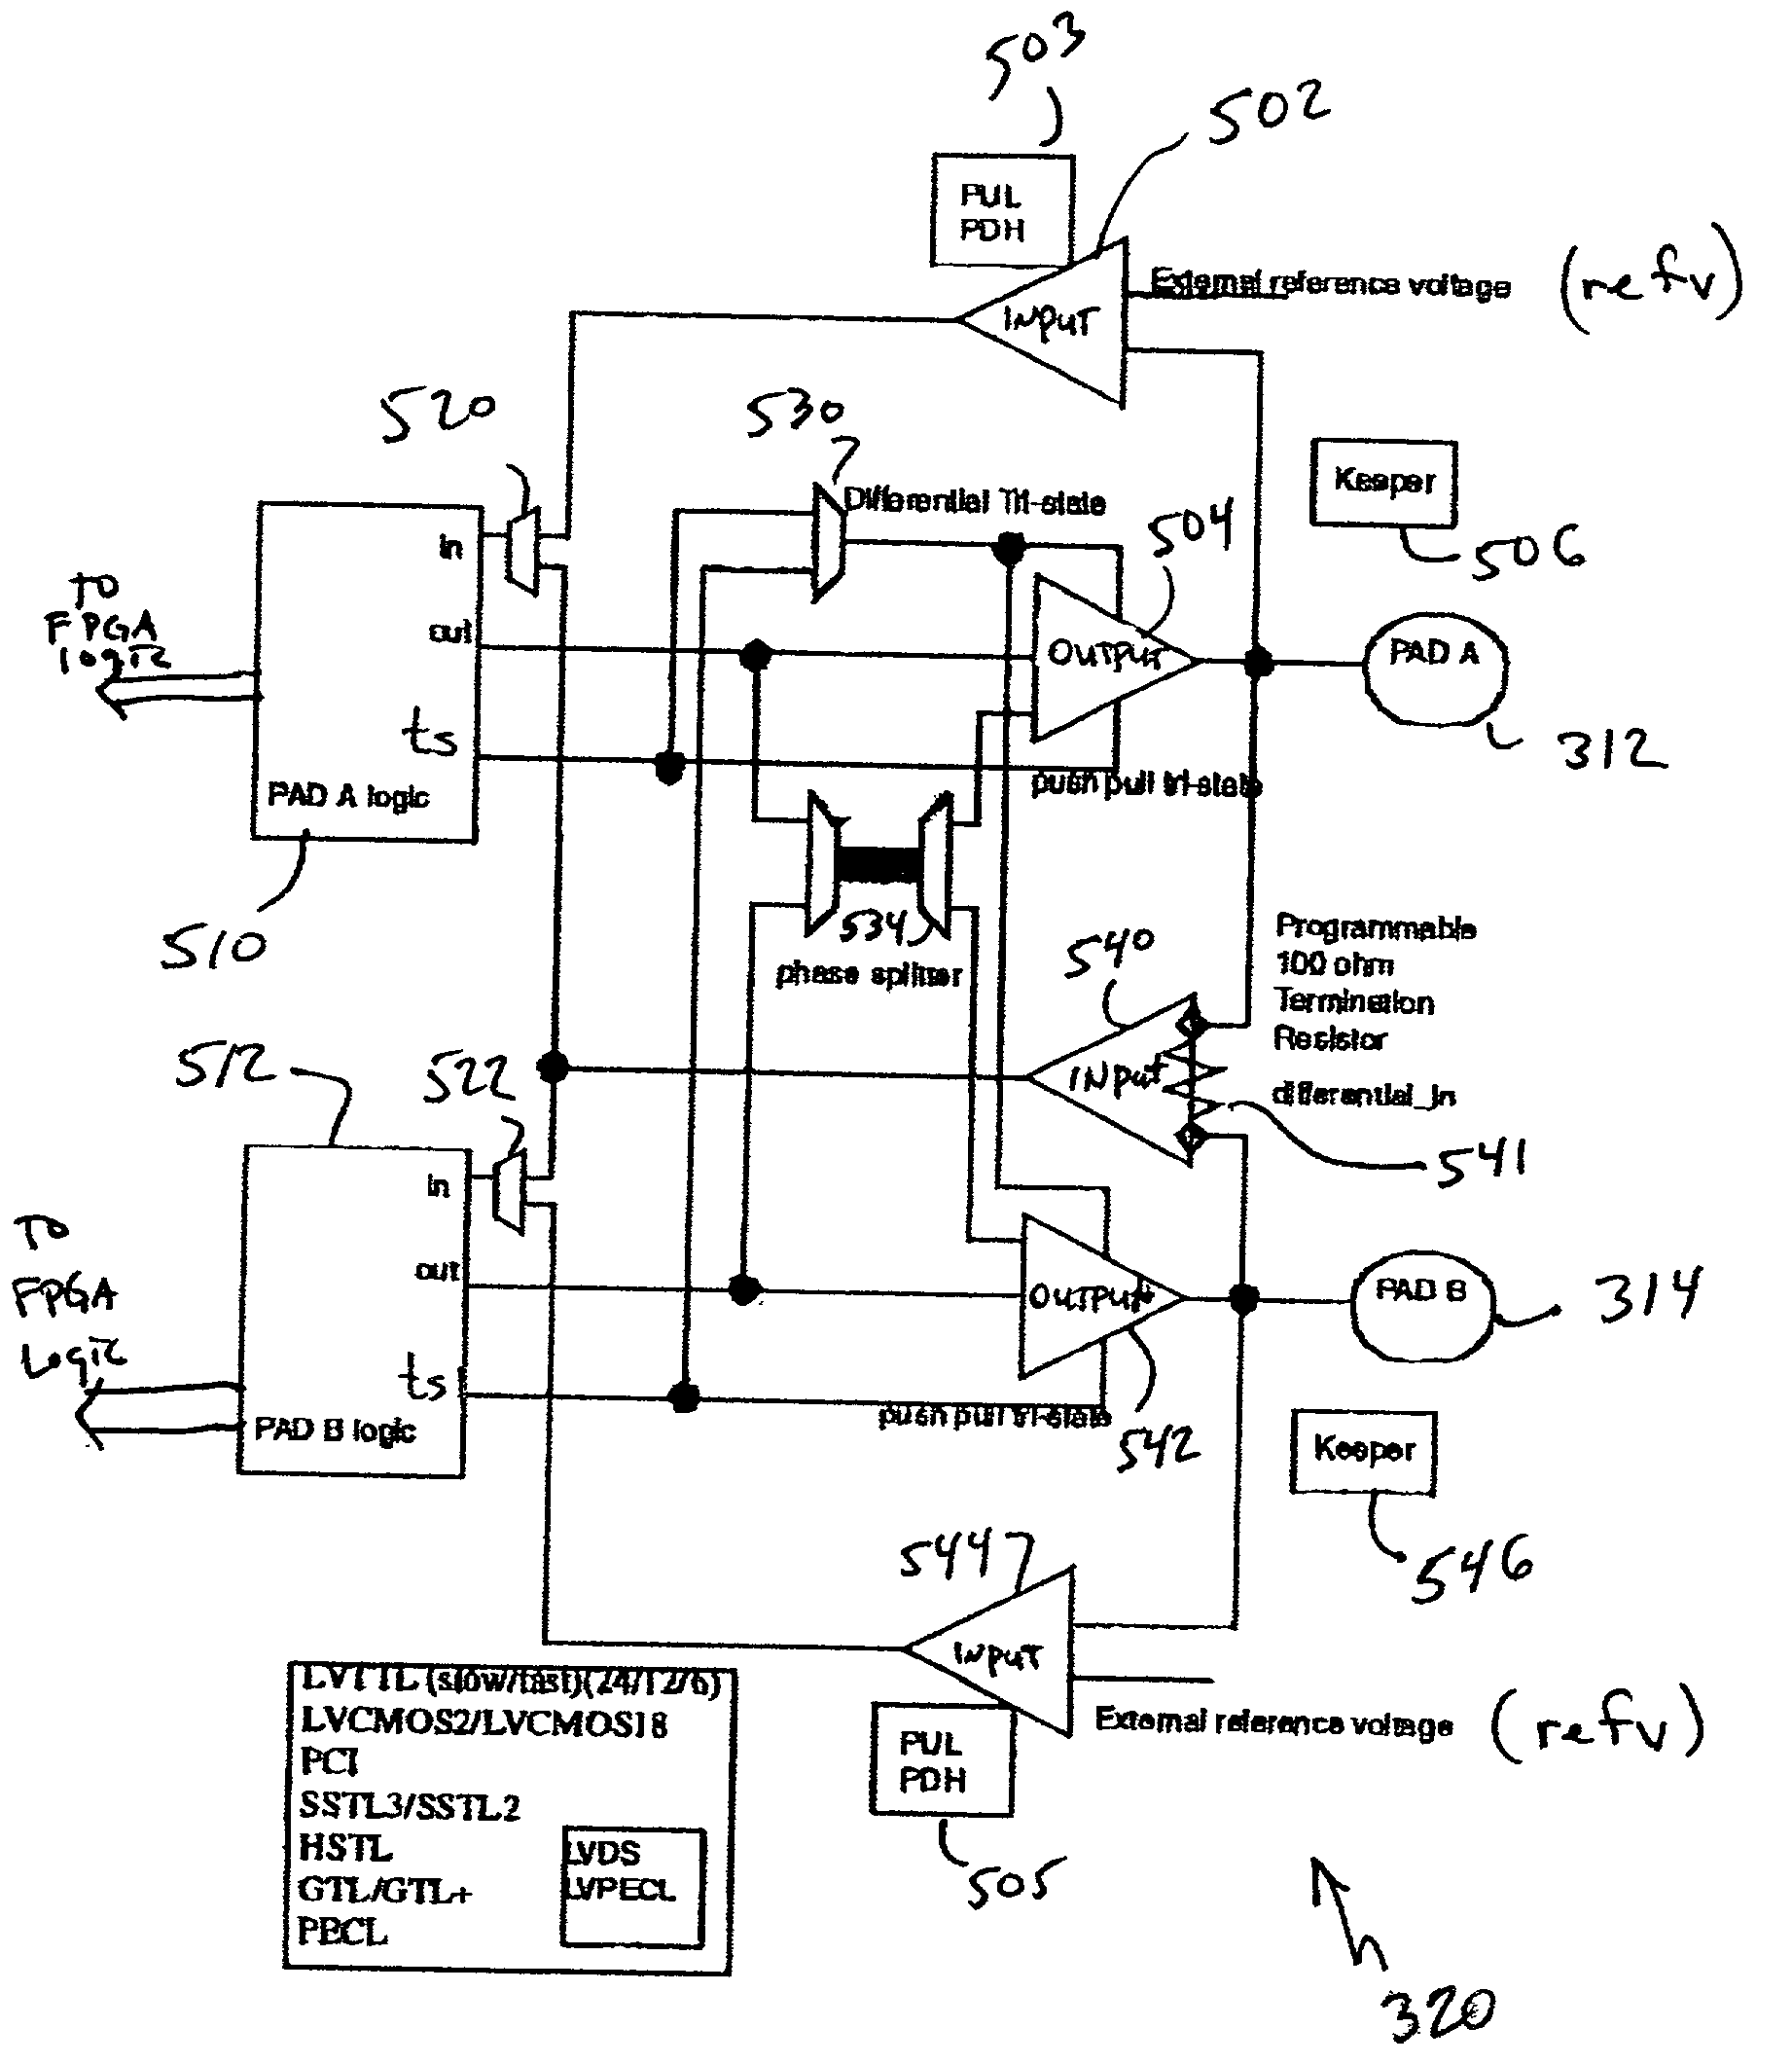 Double data rate input and output in a programmable logic device